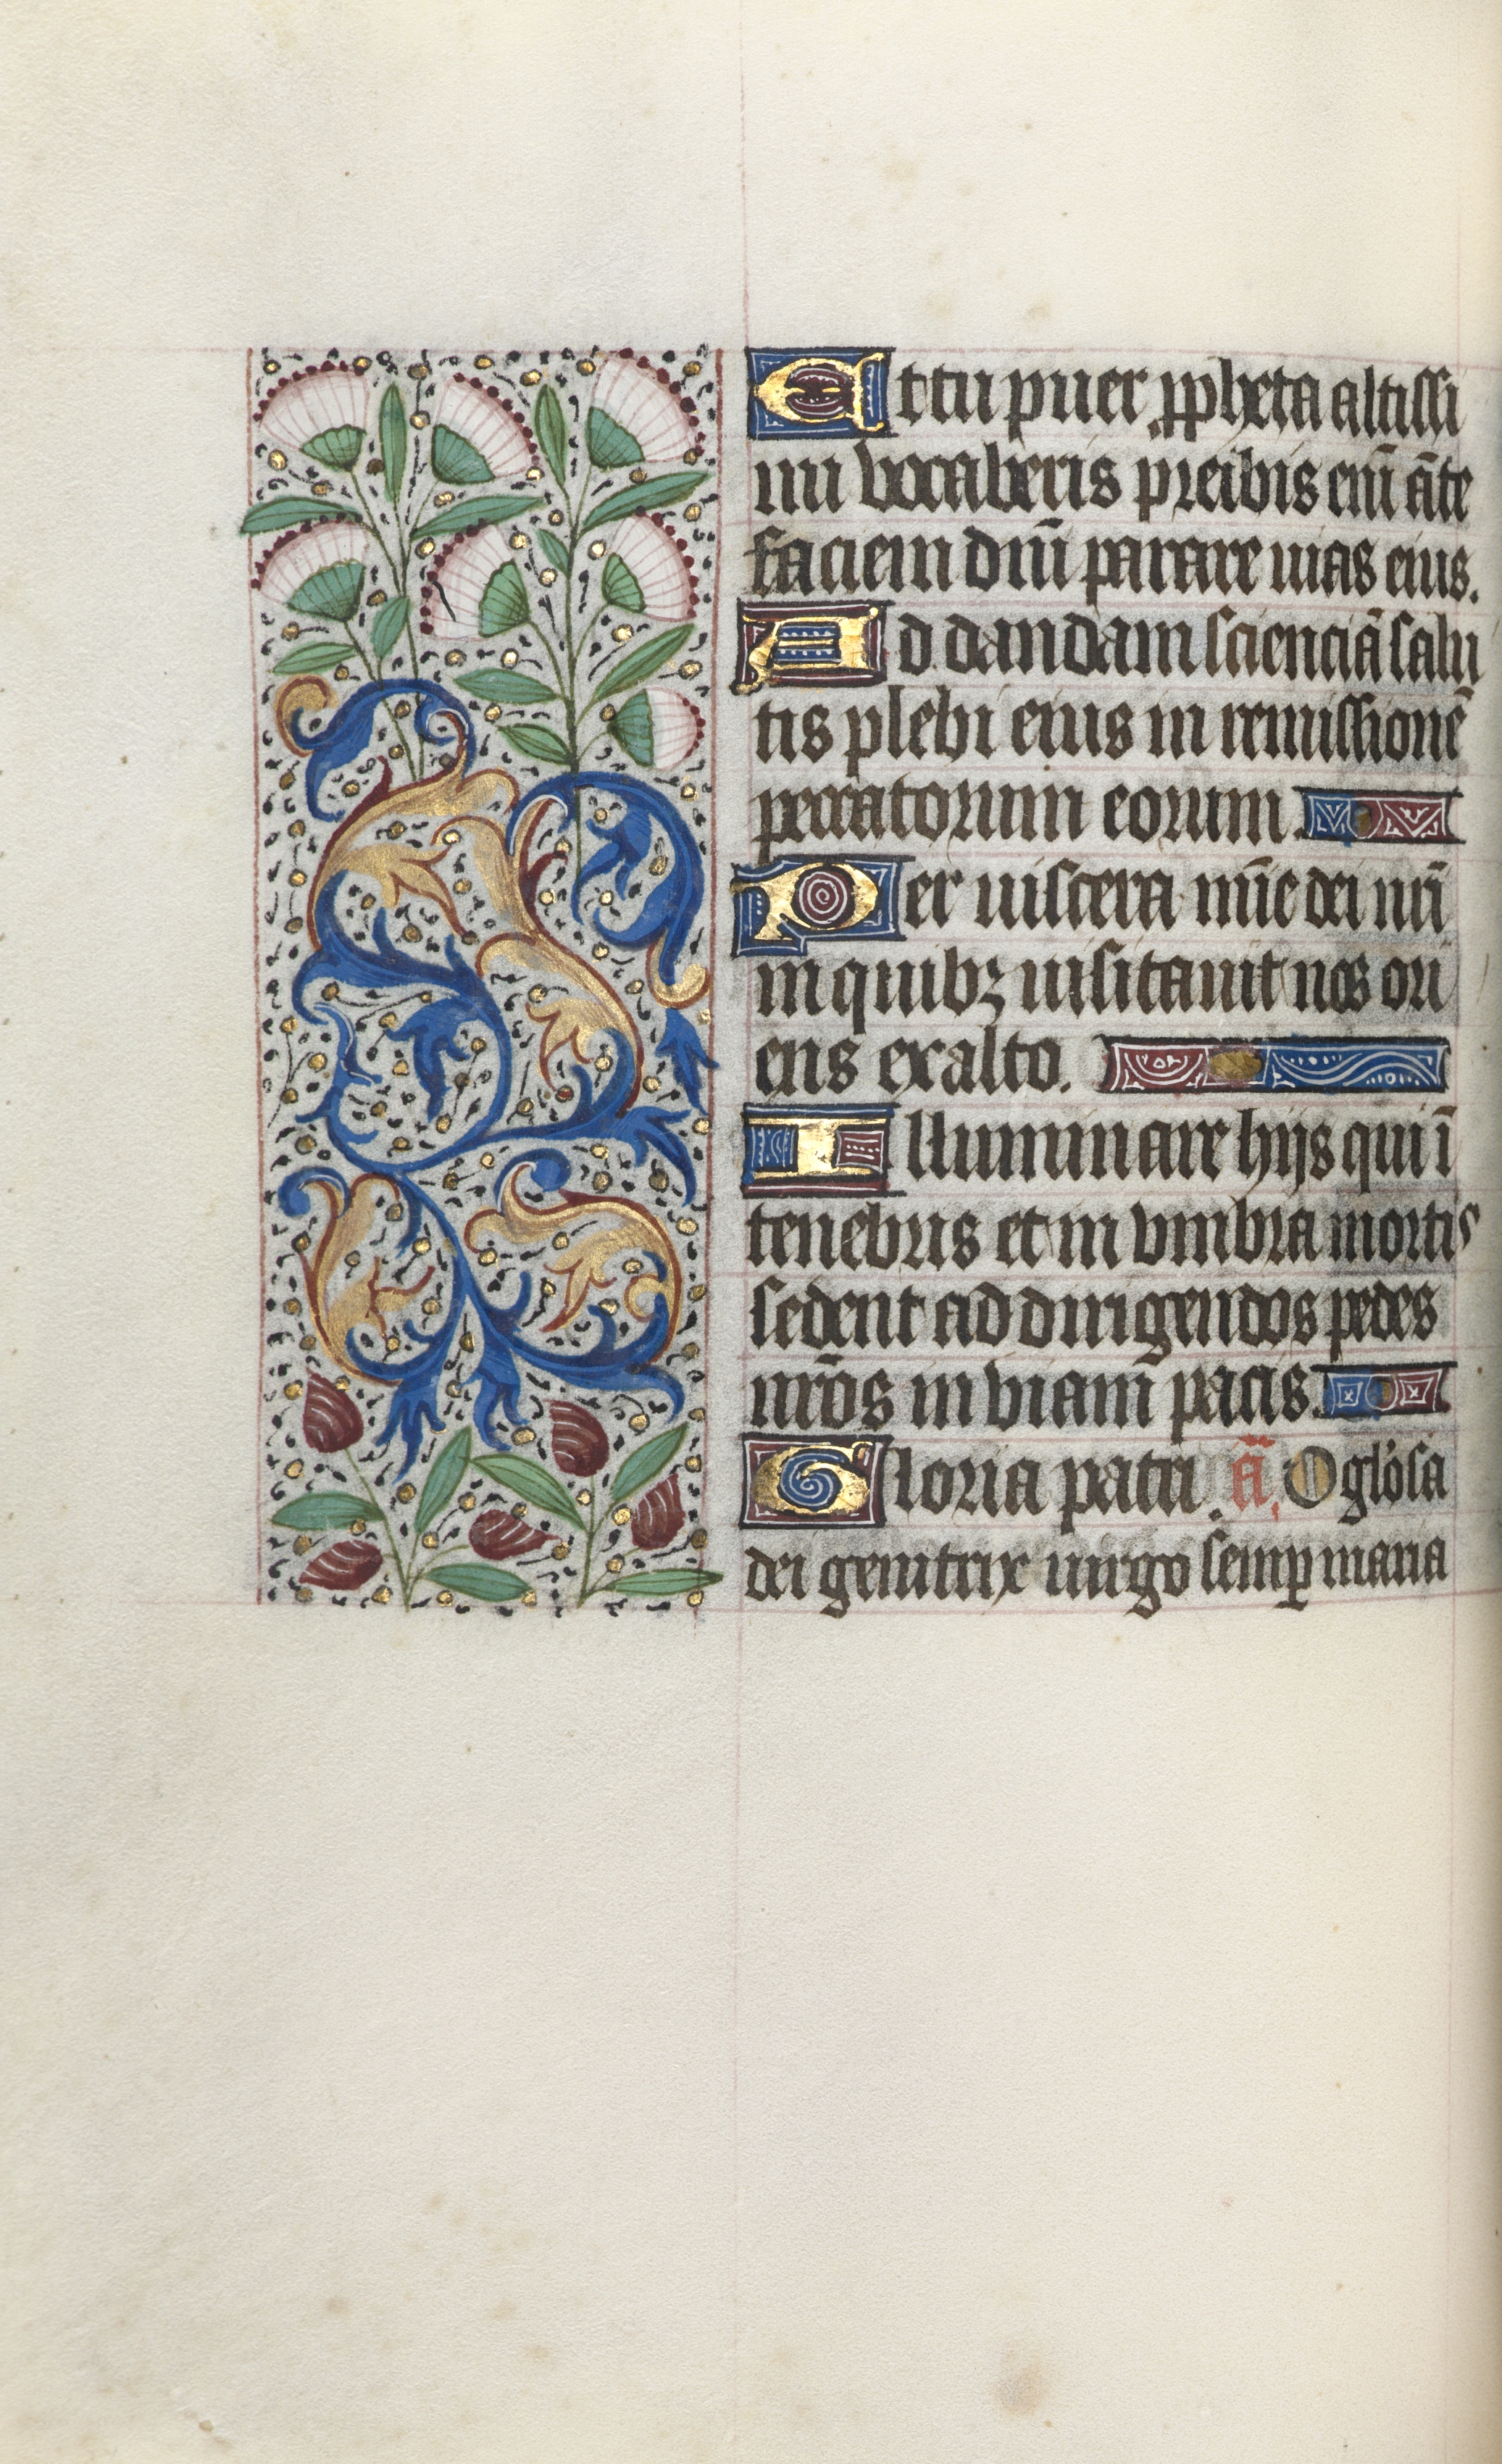 Book of Hours (Use of Rouen): fol. 48v